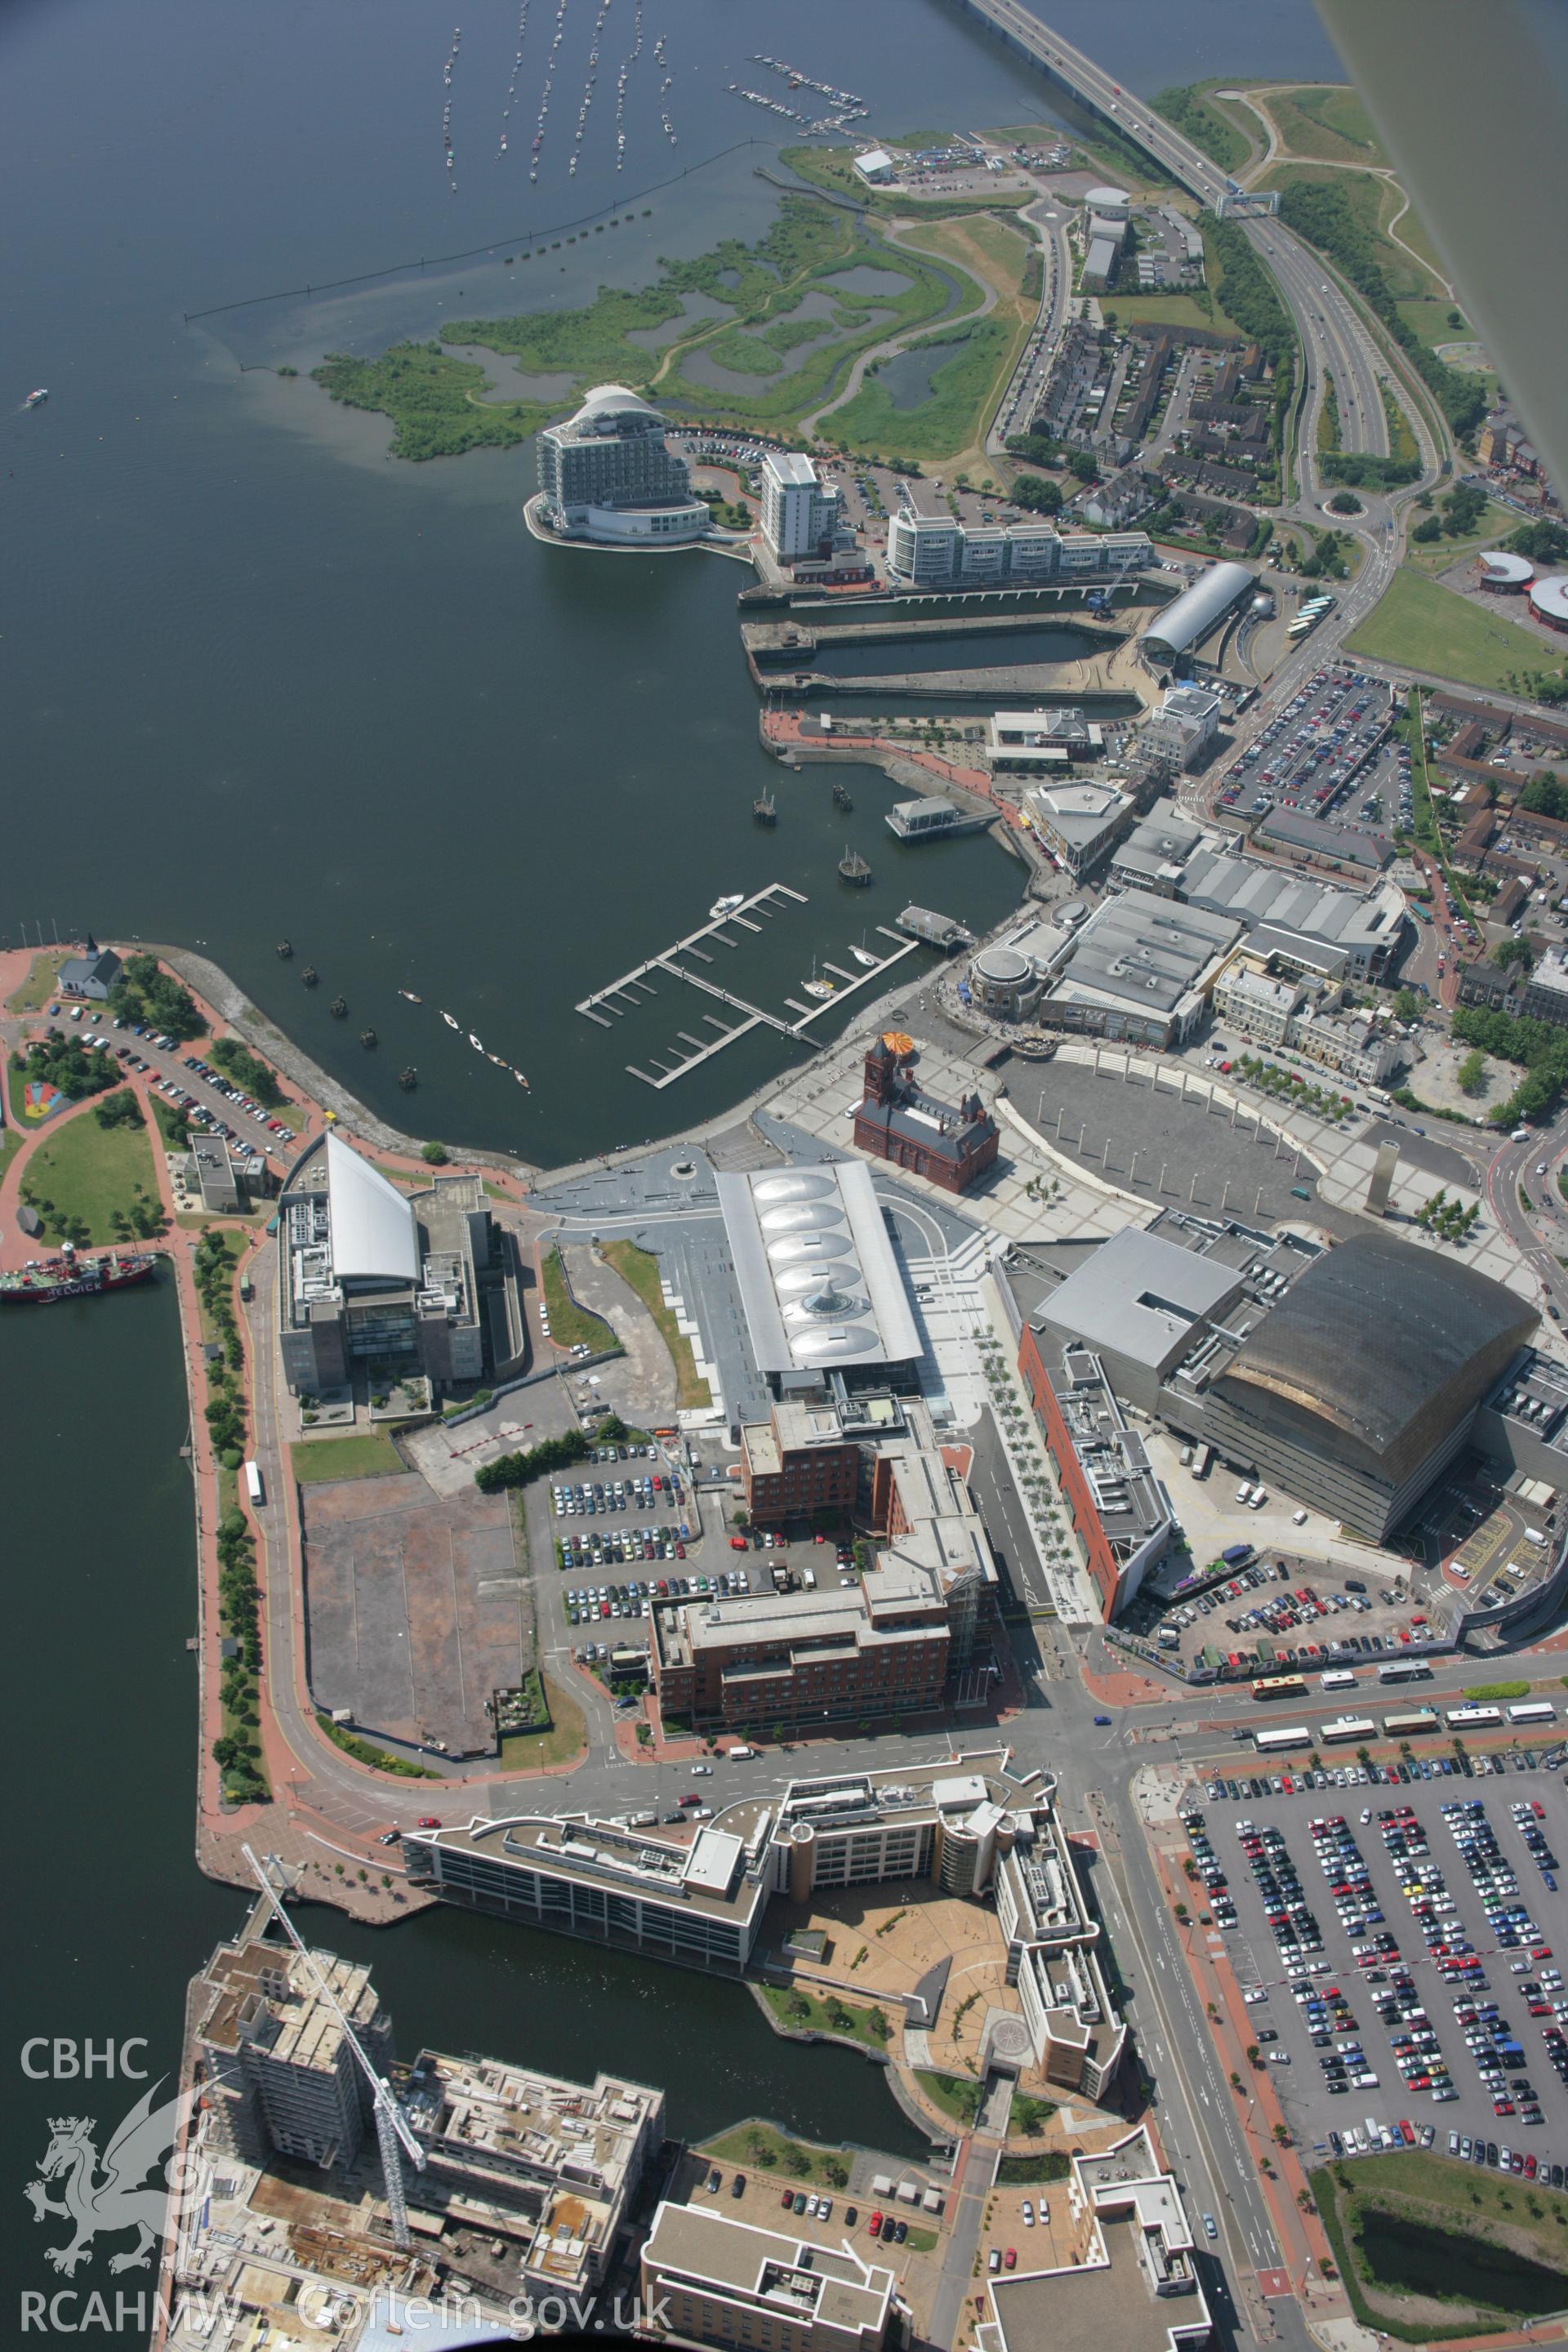 RCAHMW colour oblique photograph of Cardiff Bay. Taken by Toby Driver on 29/06/2006.